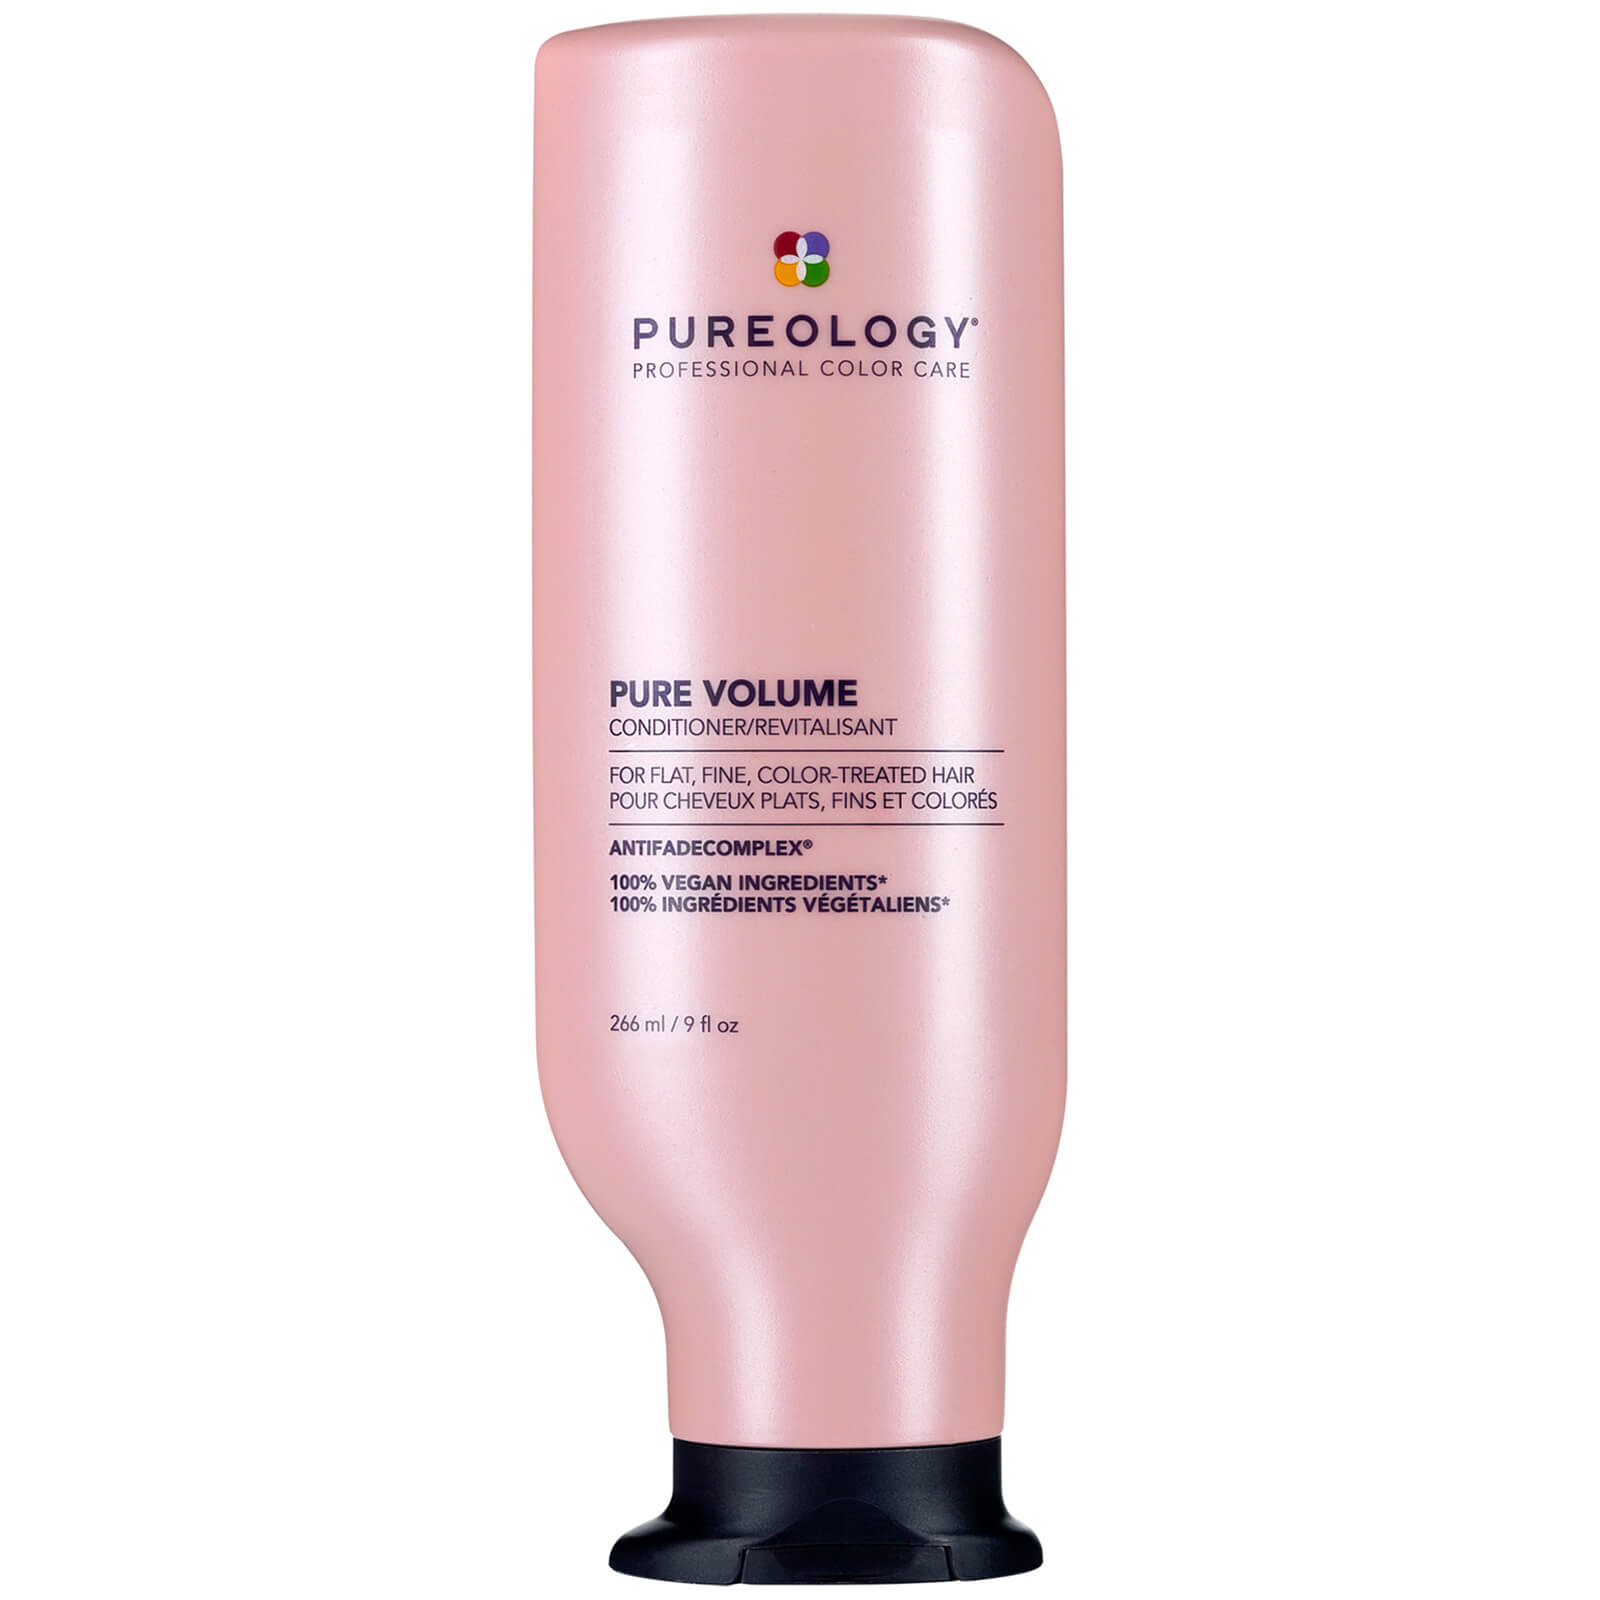 Image of Pureology Pure Volume Conditioner 266ml